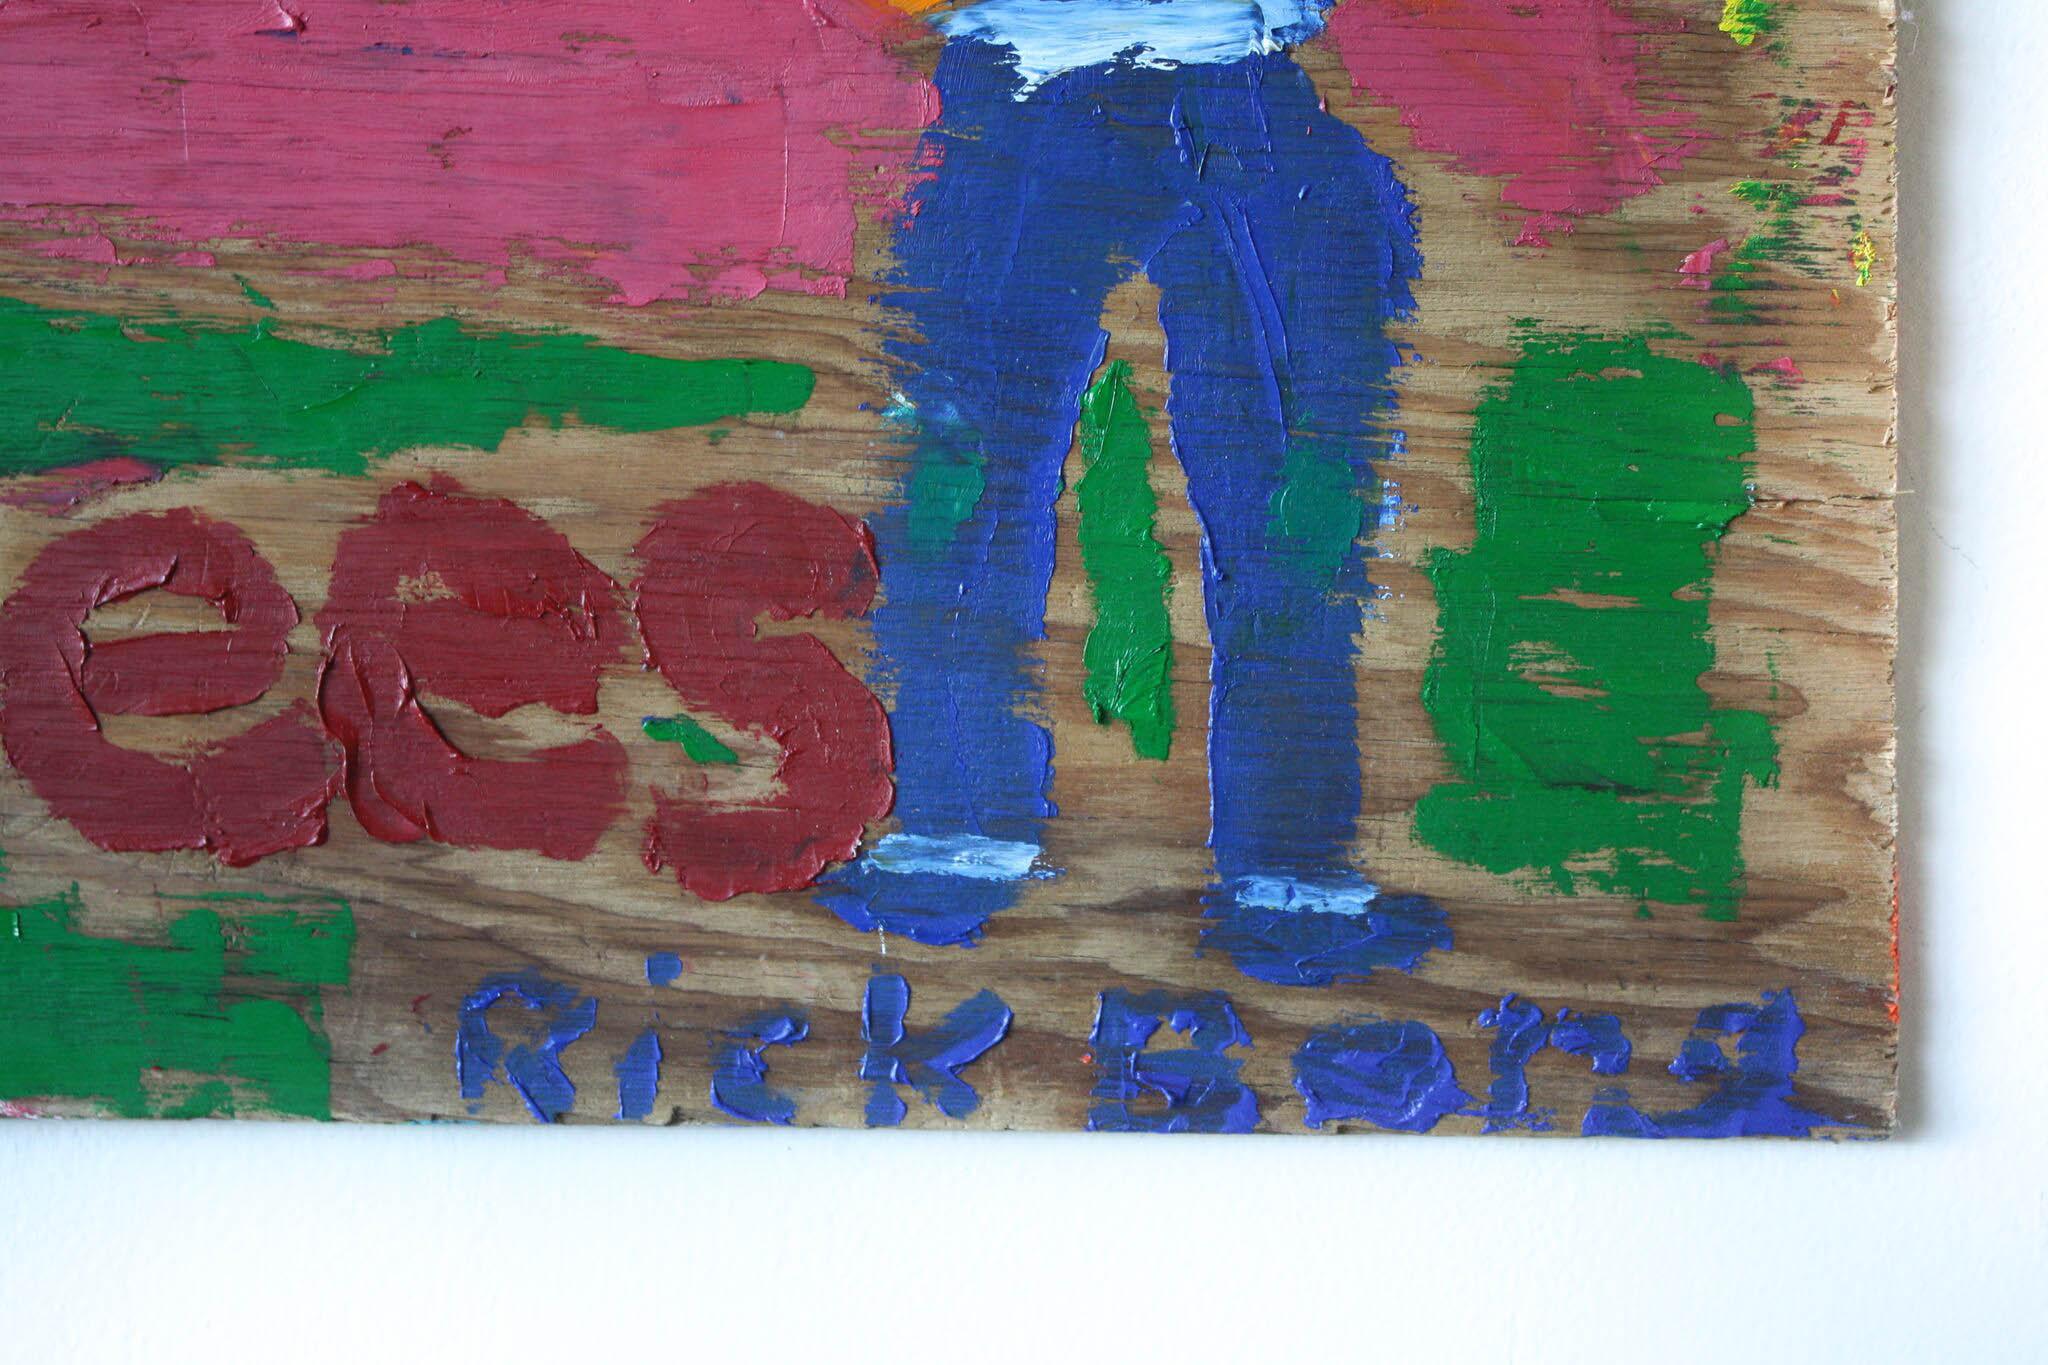 Birds and Bees on Found Wood//Folk Art - Pink Figurative Painting by Rick Borg